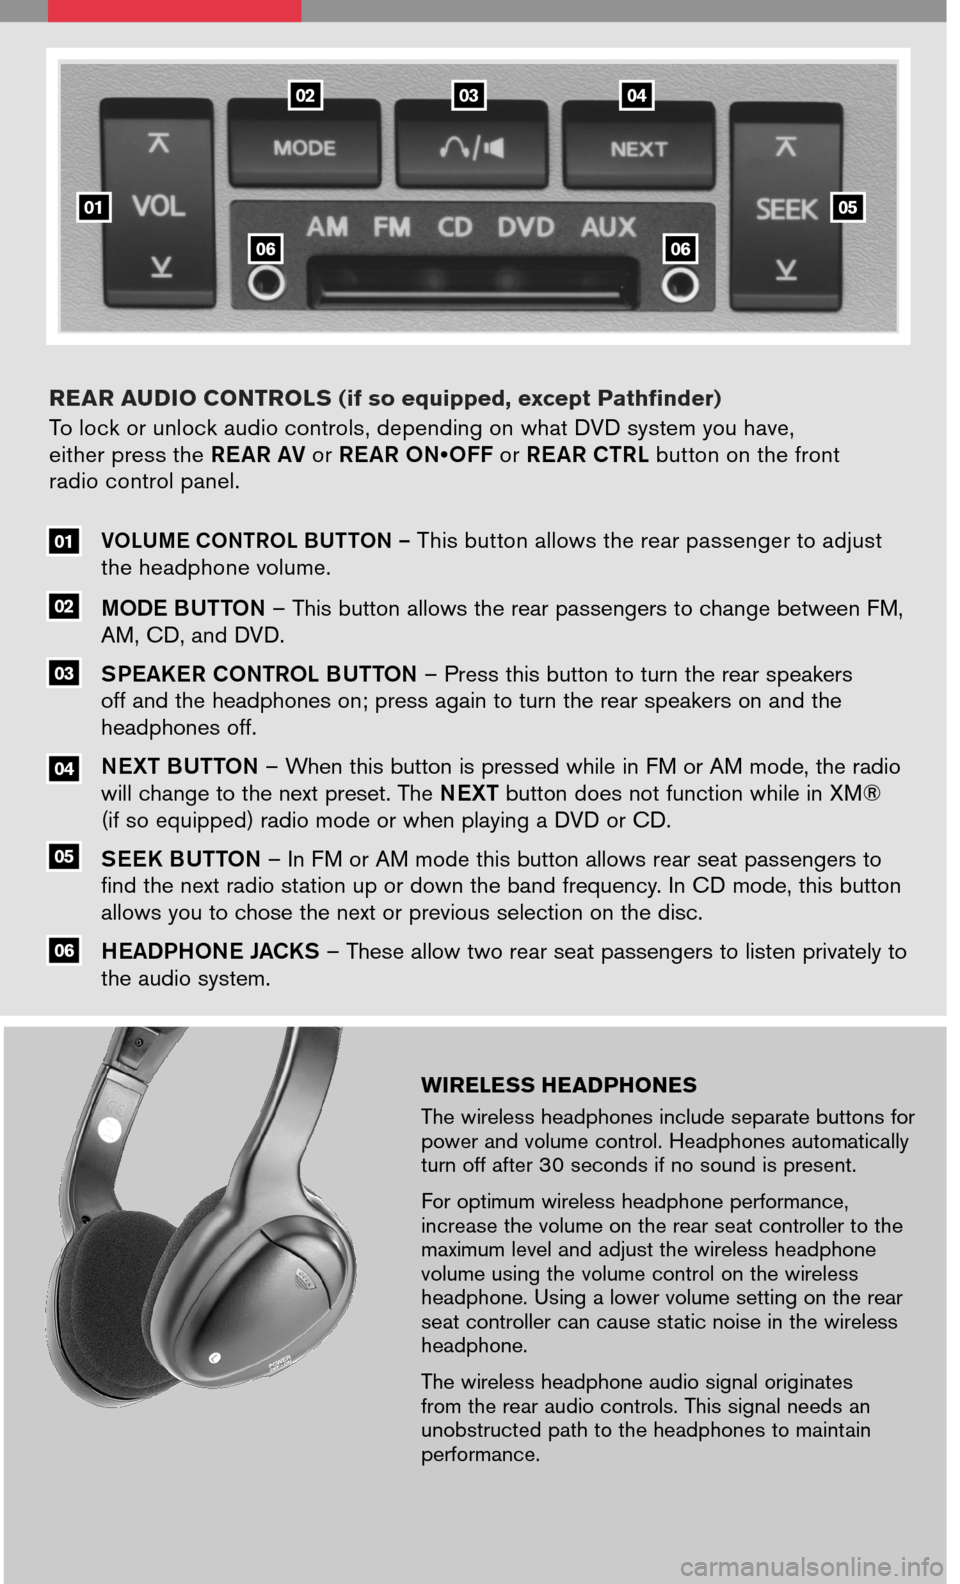 NISSAN QUEST 2008 V42 / 3.G Entertainment Syst 
WIRELESS HEADPHONES
The wireless headphones include separate buttons for power and volume control. Headphones automatically turn off after 30 seconds if no sound is present.
For optimum wireless head